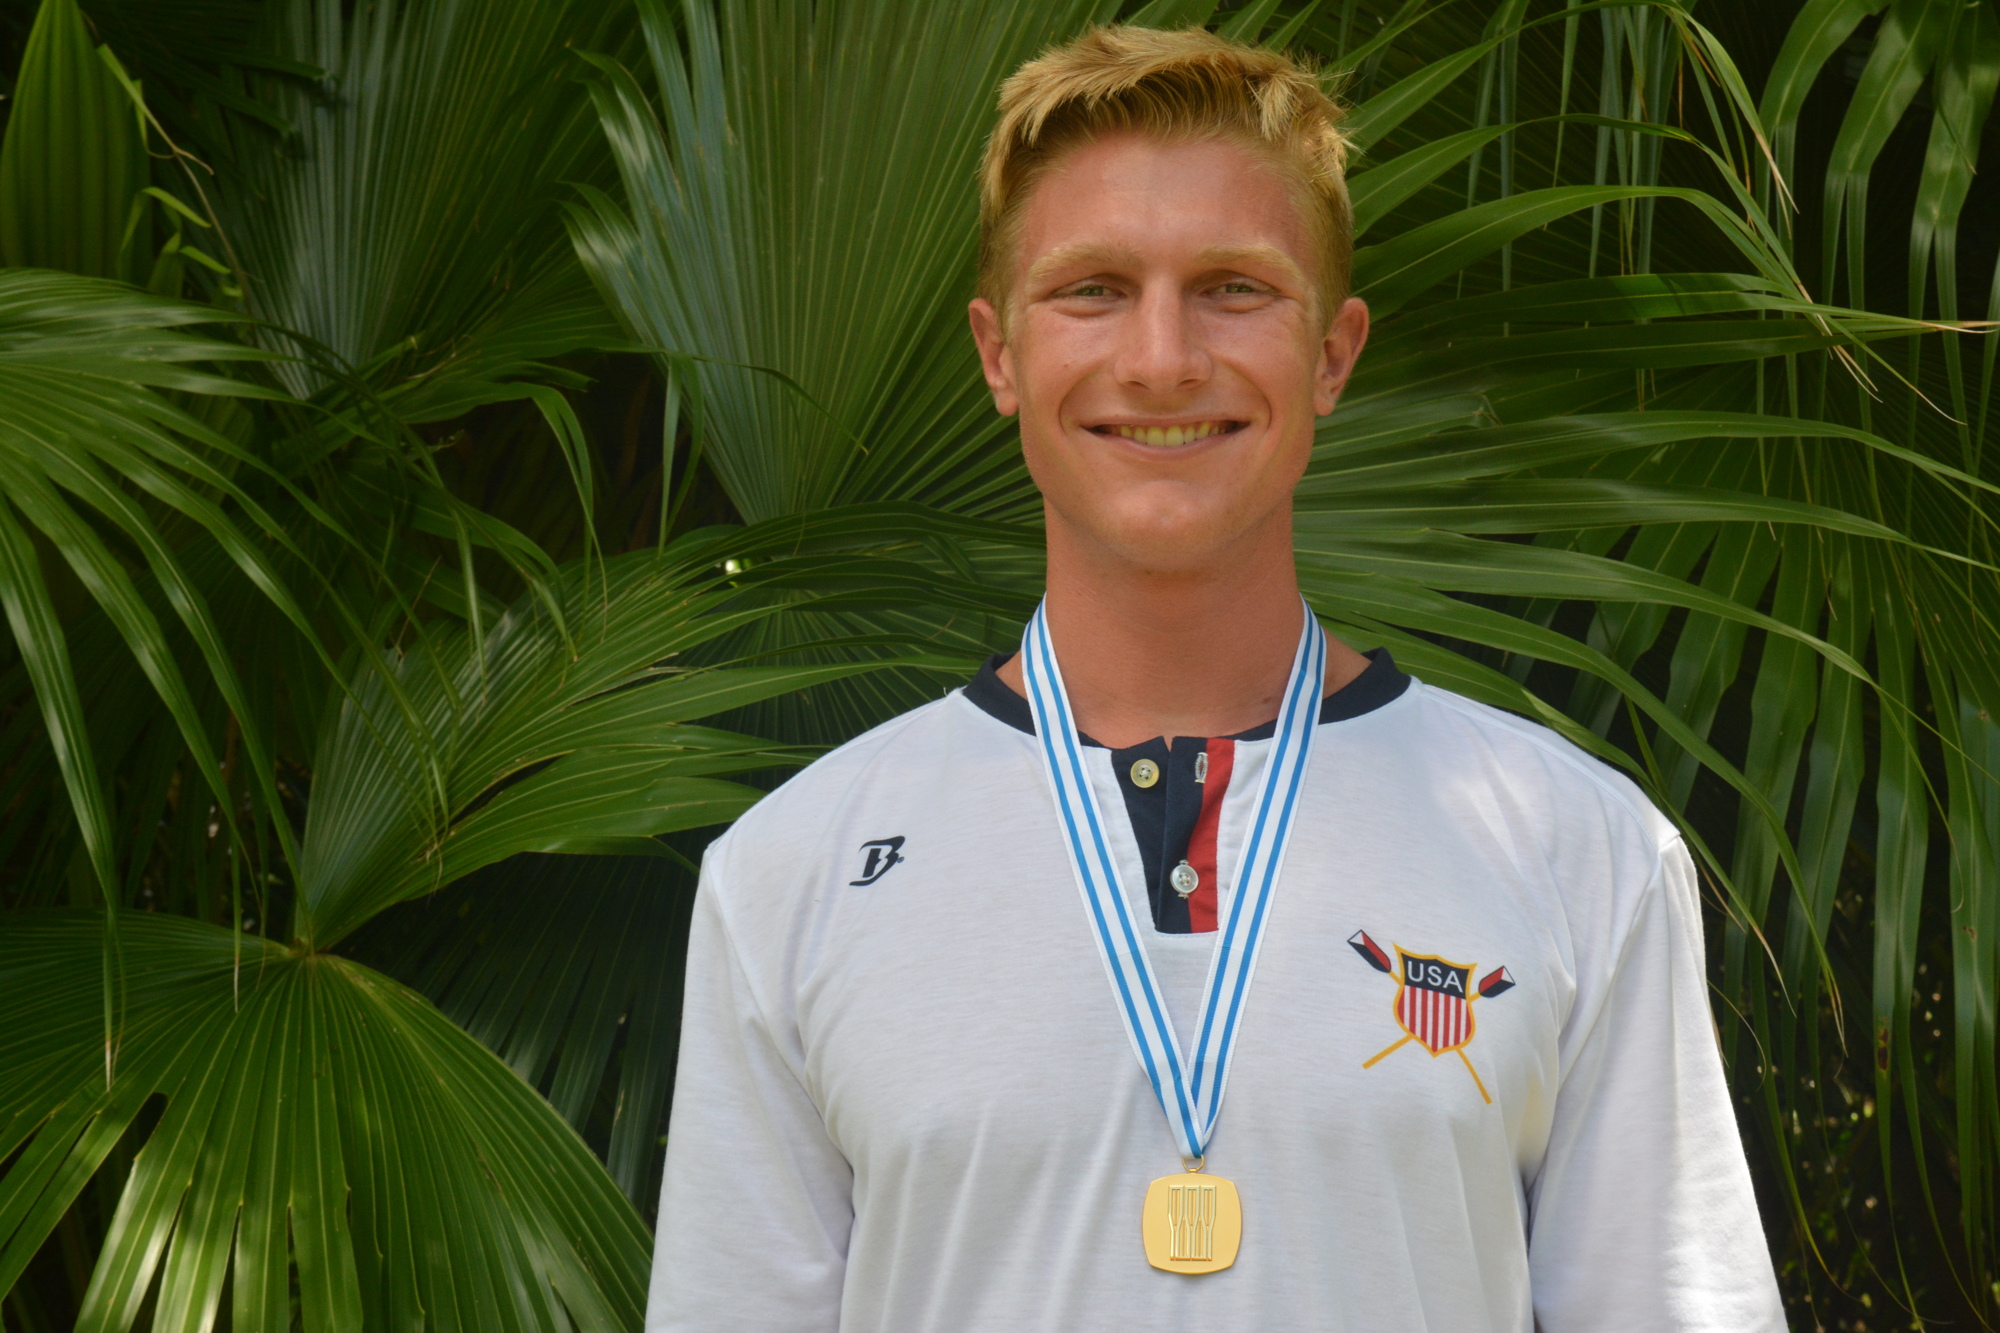 Clark Dean became the first American to win the men's single scull race at the World Rowing Junior Championships in 50 years.